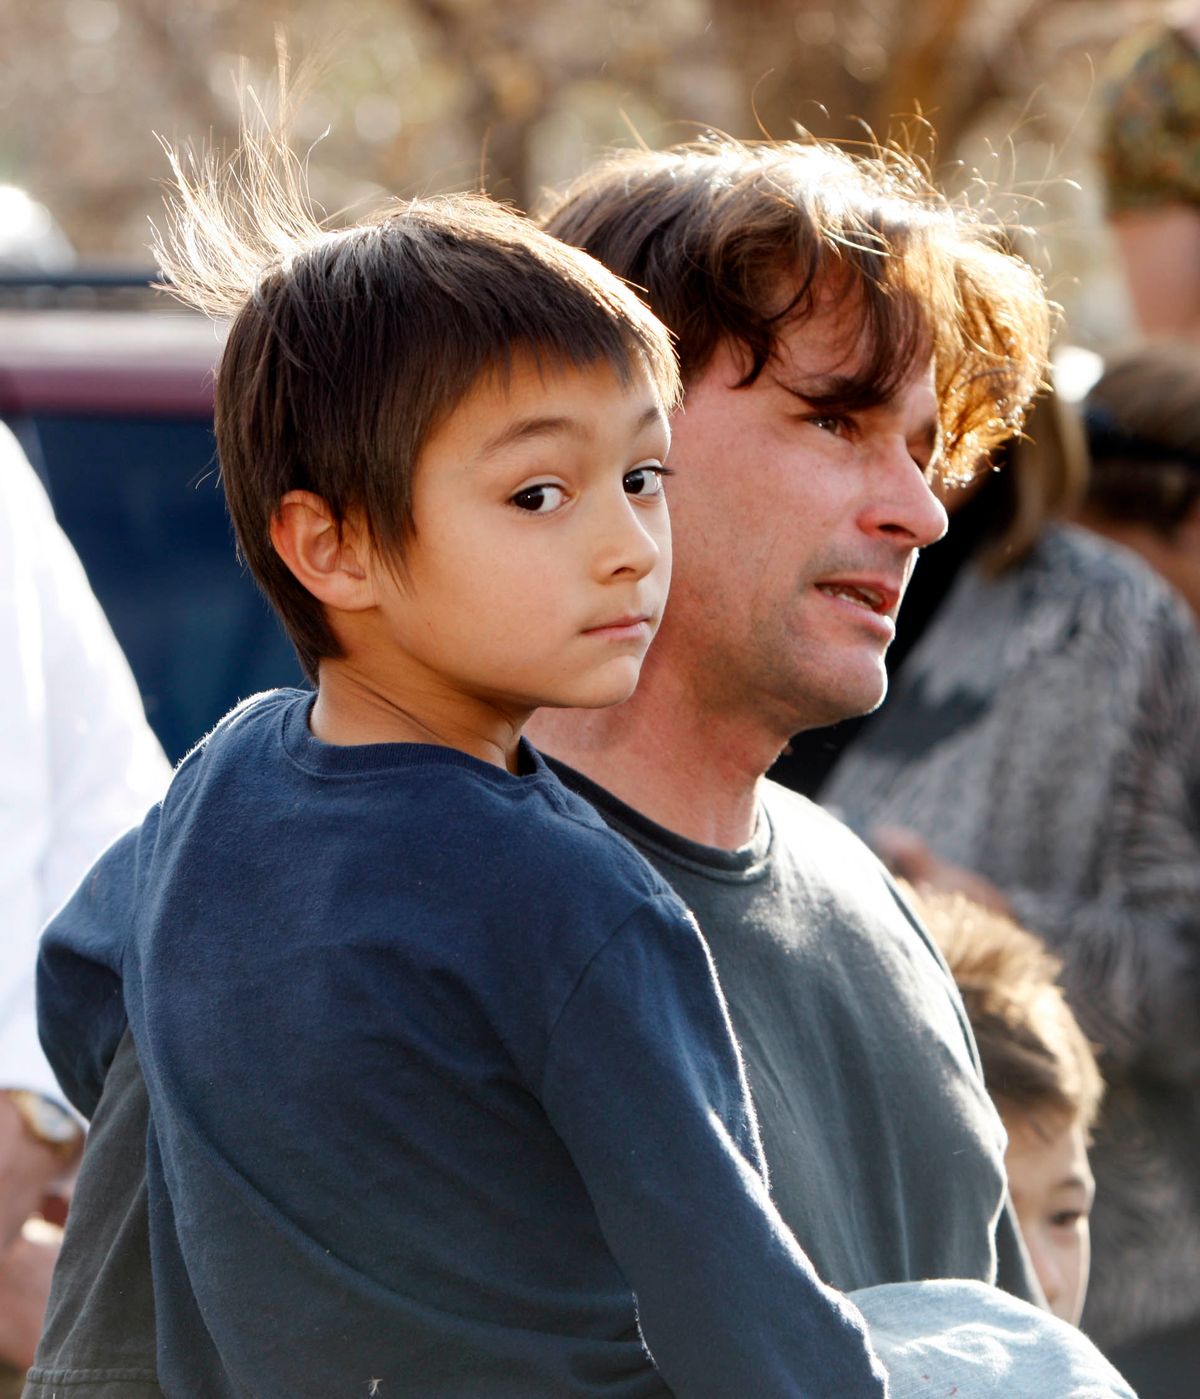 ** FOR USE AS DESIRED, YEAR END PHOTOS ** FILE -  In this Oct. 15, 2009 file photo, six-year-old Falcon Heene is shown with his father, Richard, outside the family's home in Fort Collins, Colo., after Falcon Heene was found hiding in a box in a space above the garage. (AP Photo/David Zalubowski, File) (Associated Press)